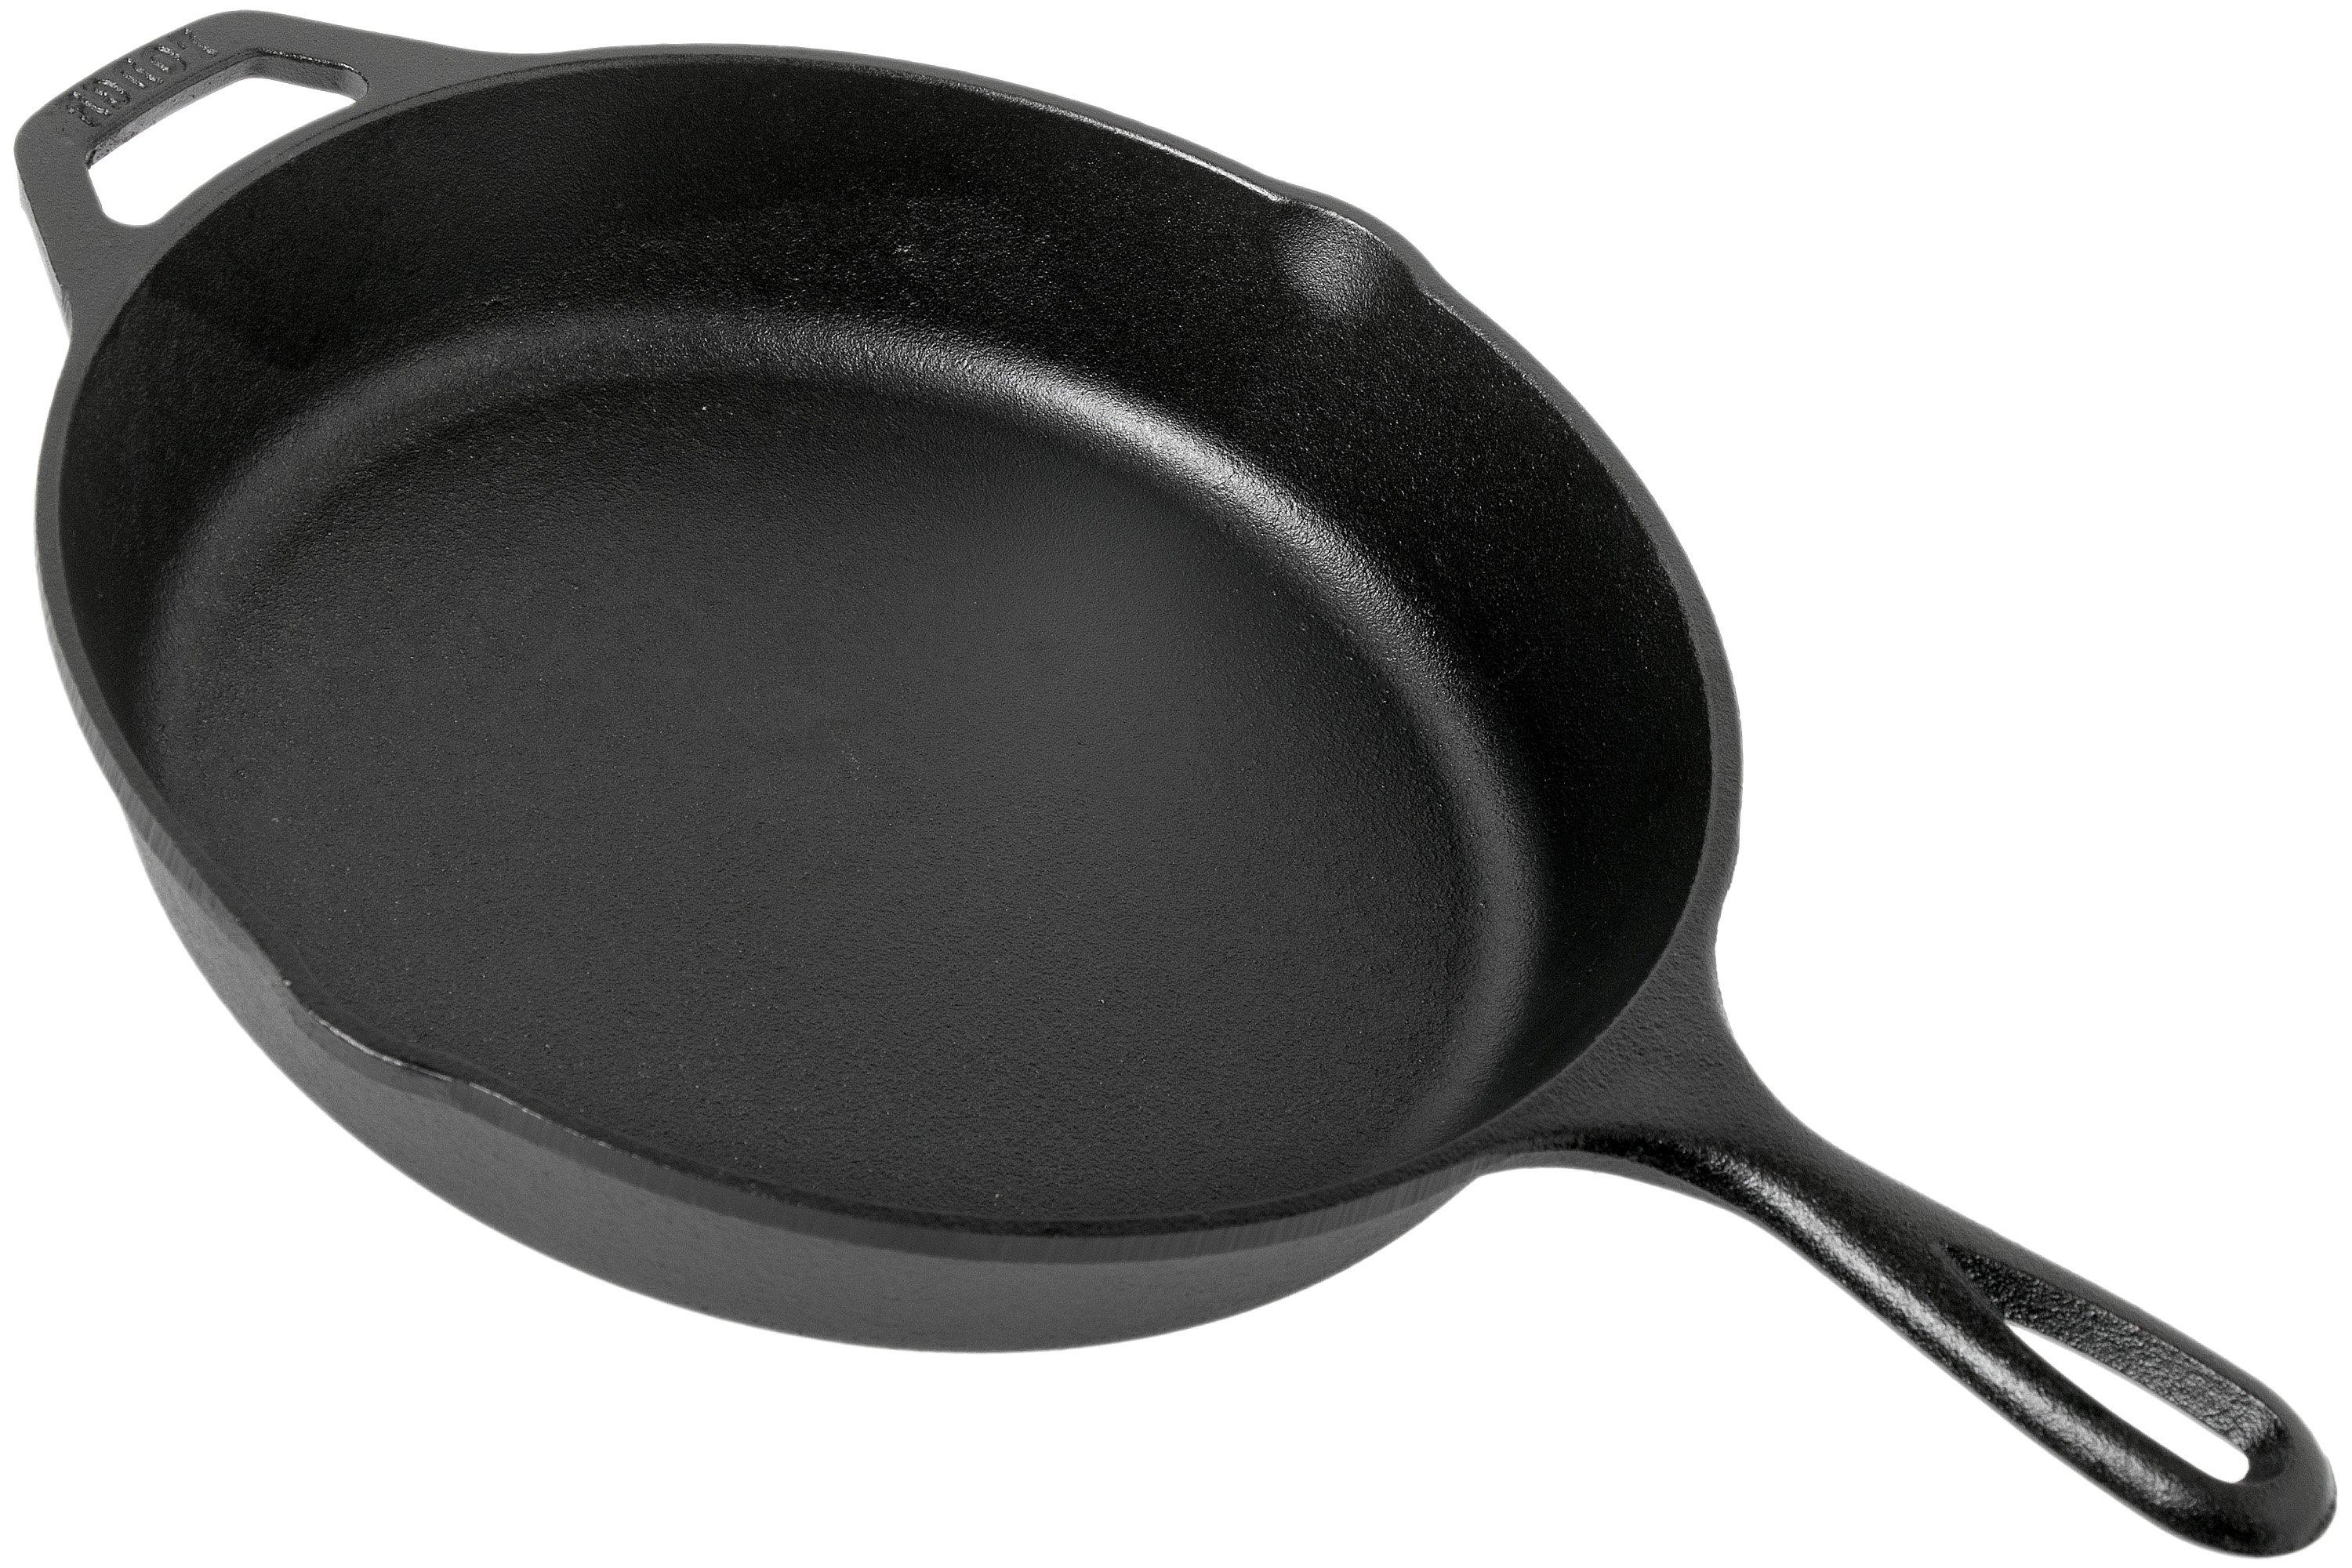 Lodge Cast Iron 11” Skillet with Silicone Handle Cover for $20